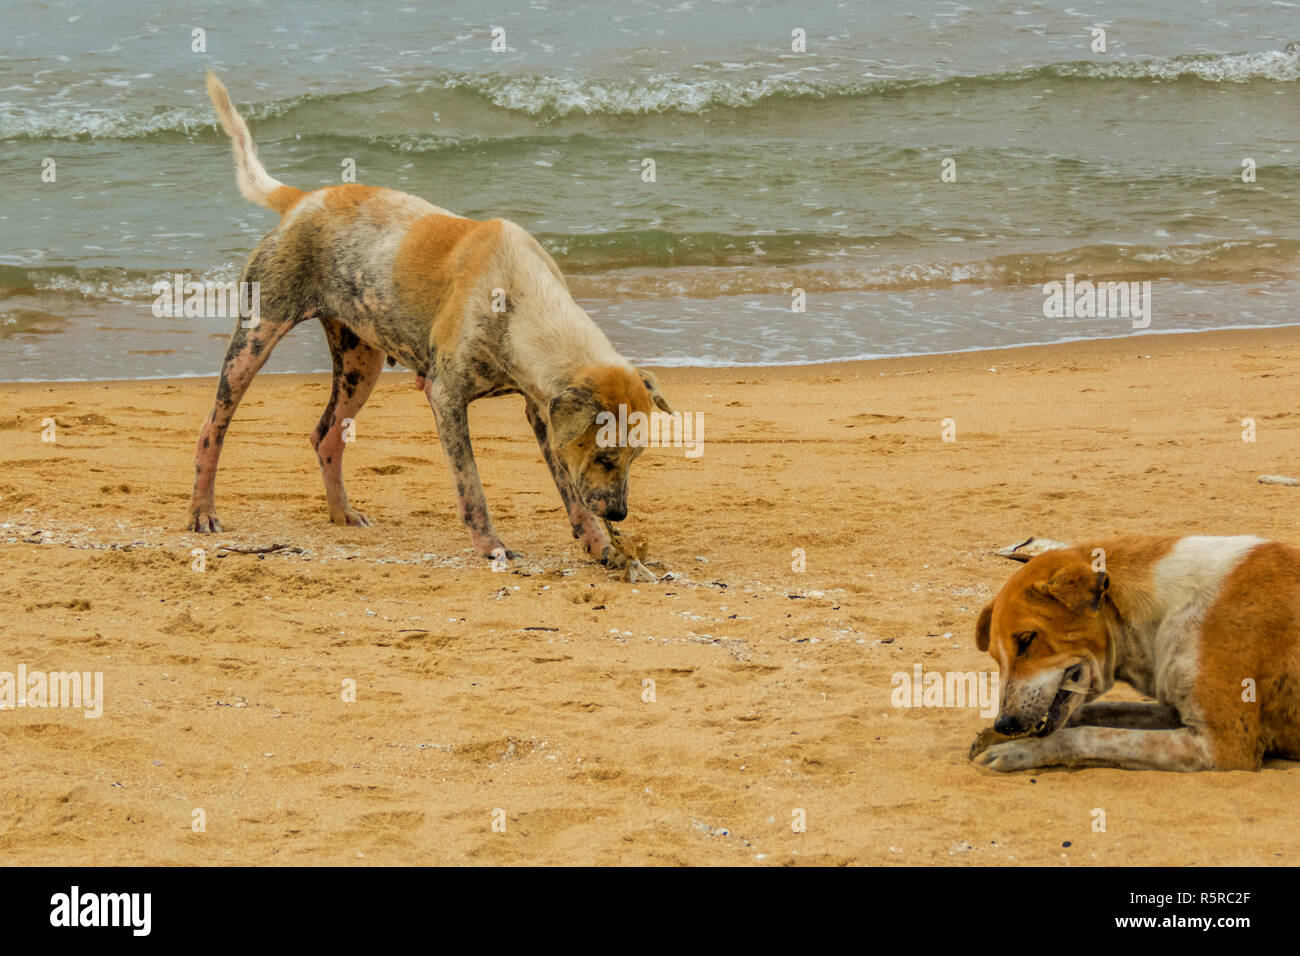 two poor mangy dogs very sick are eating dead fishes on the beach, Sri Lanka Stock Photo